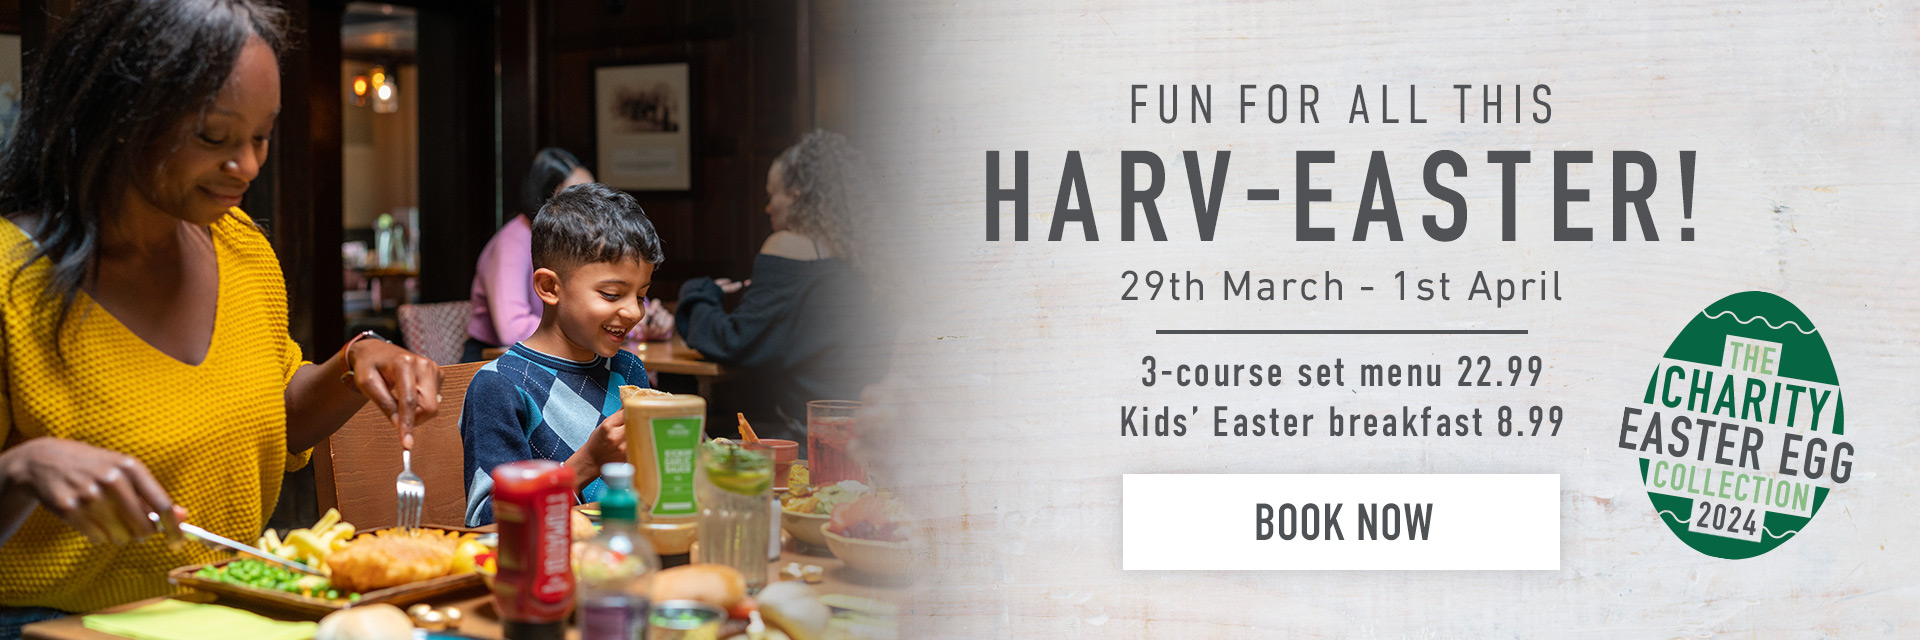 Easter at Harvester Bassetts Pole in Sutton Coldfield